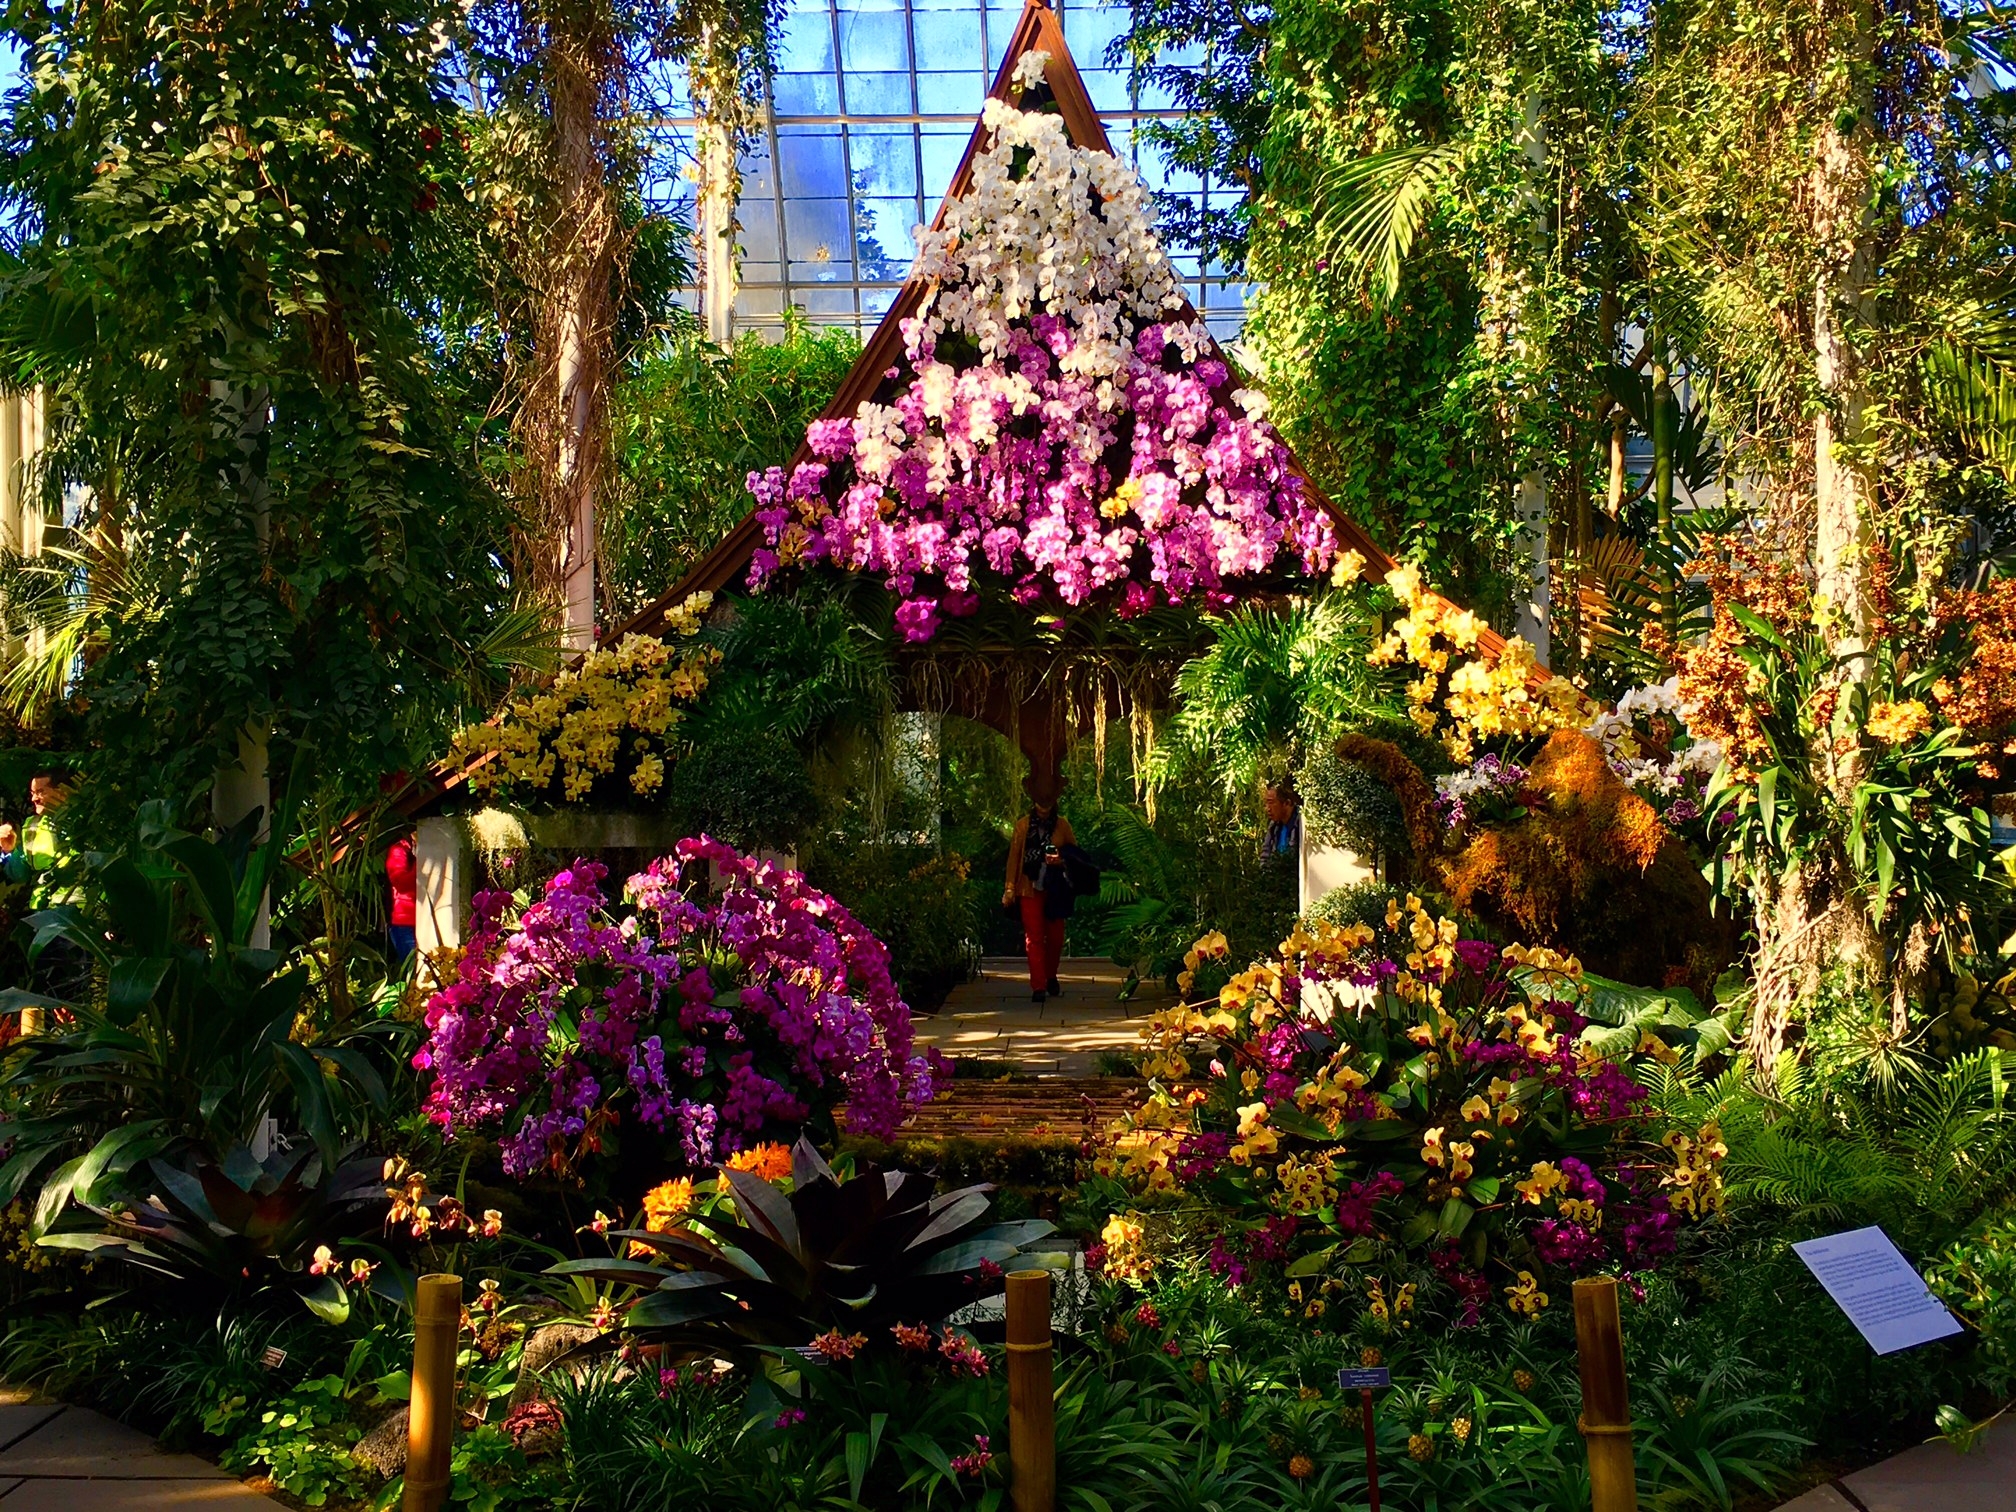 The Orchid show in New York is back to blossom! Frenzy Tours